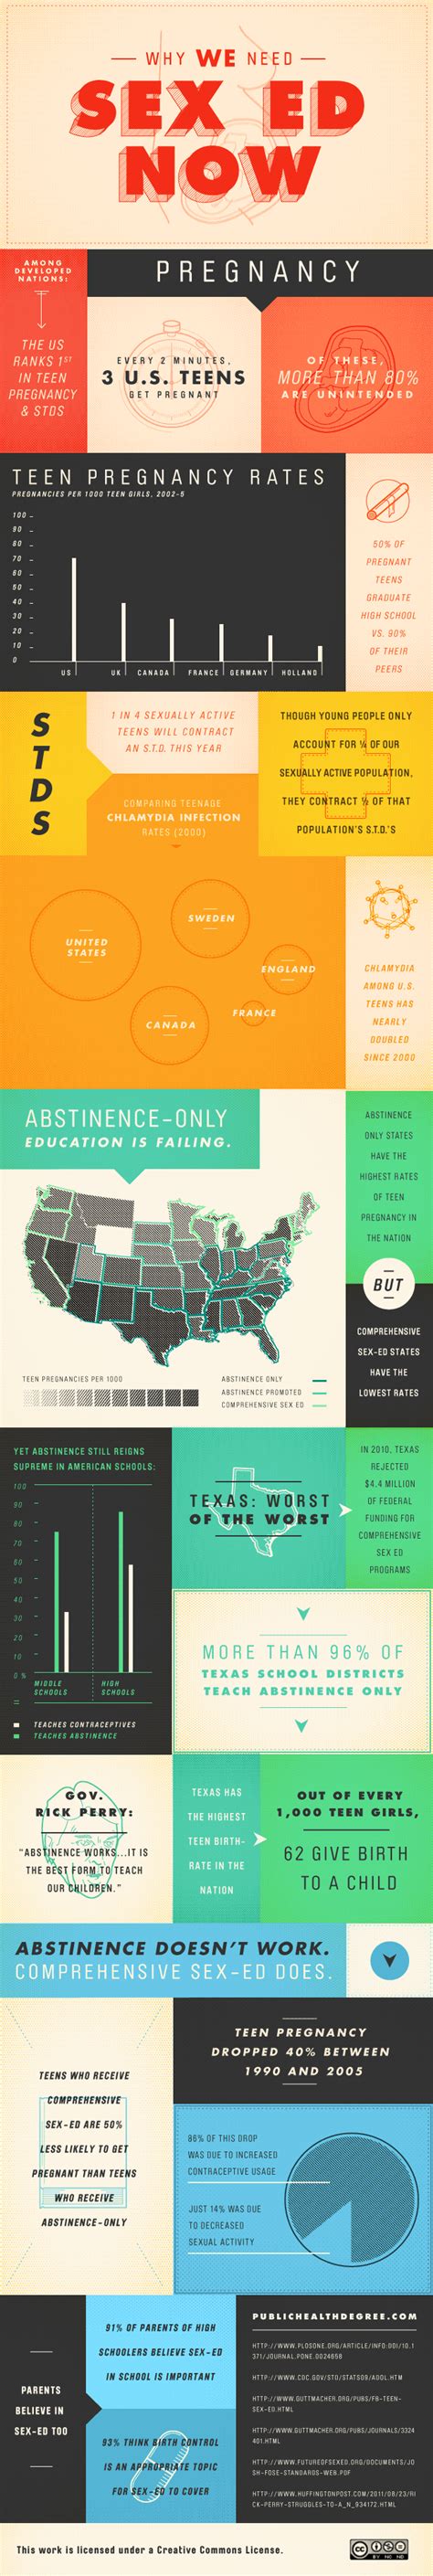 Why We Need Sex Ed Now Infographic